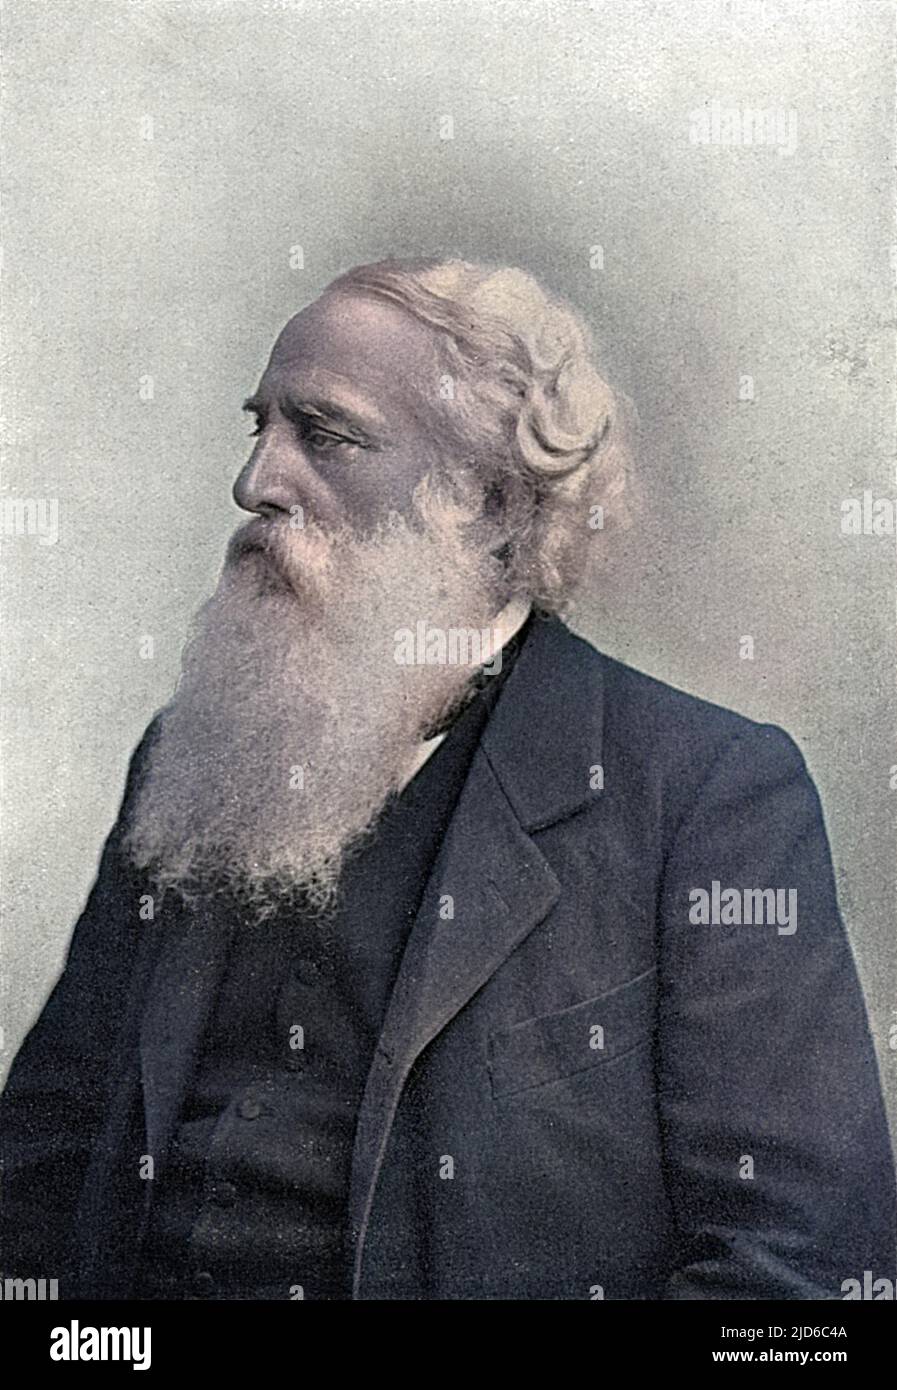 HENRY STEEL OLCOTT American industrialist, converted to spiritualism, converted to theosophy by Blavatsky, converted to Buddhism. Colourised version of : 10171150       Date: 1832 - 1907 Stock Photo